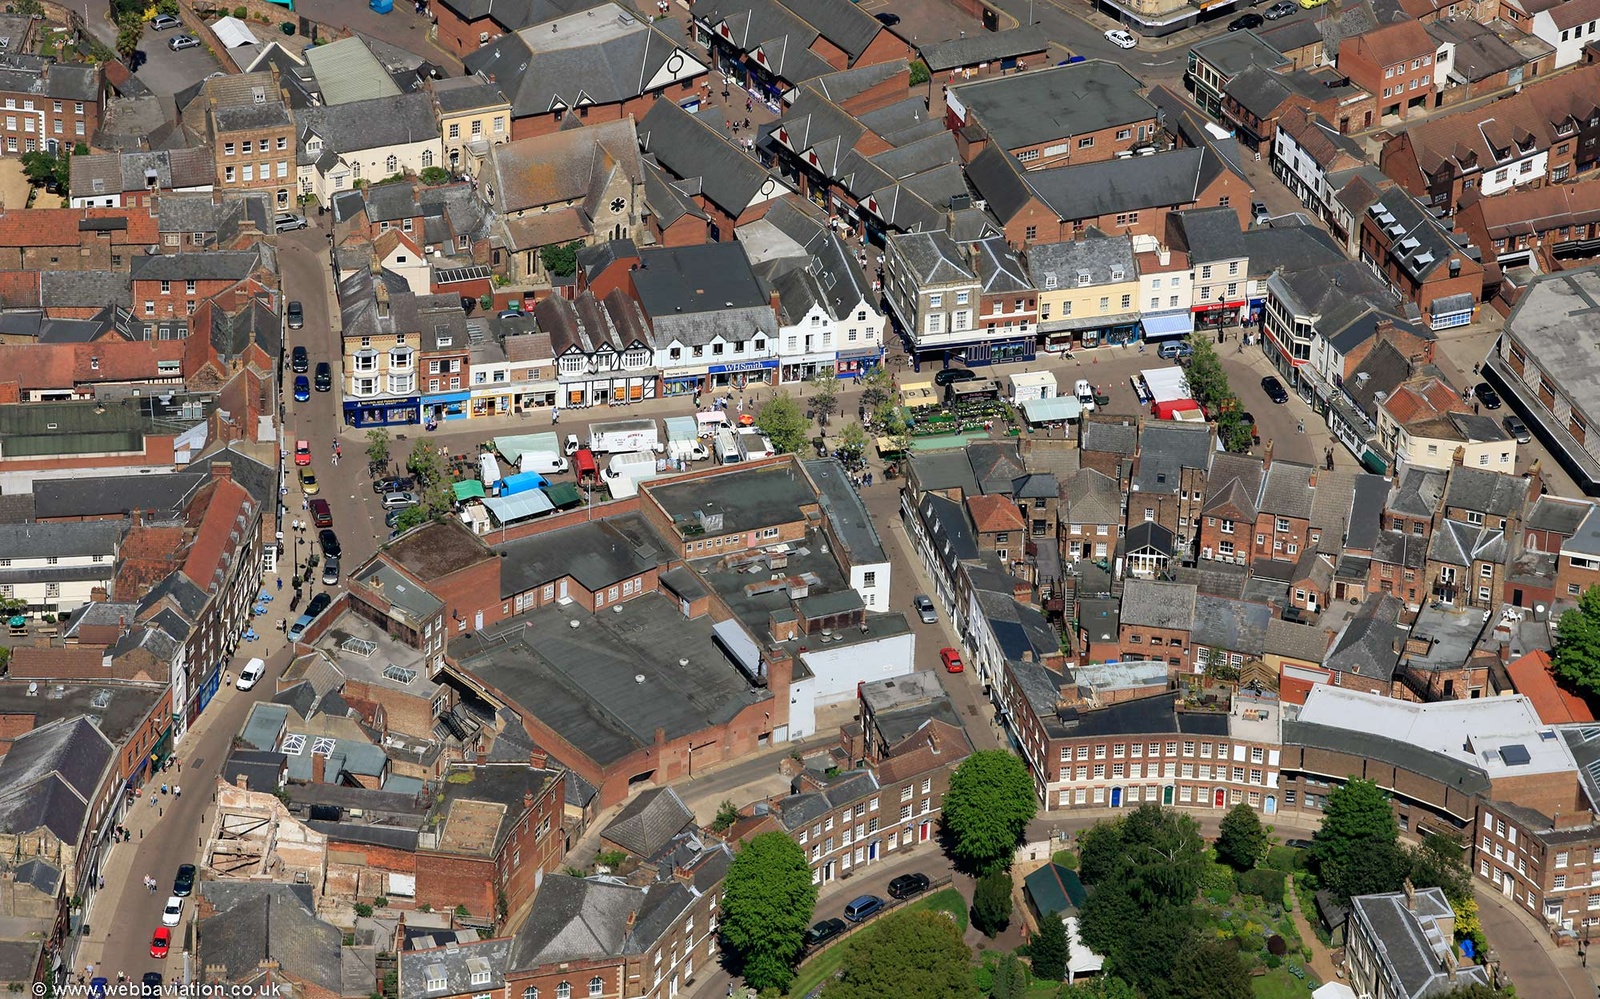 Wisbech town centre from the air